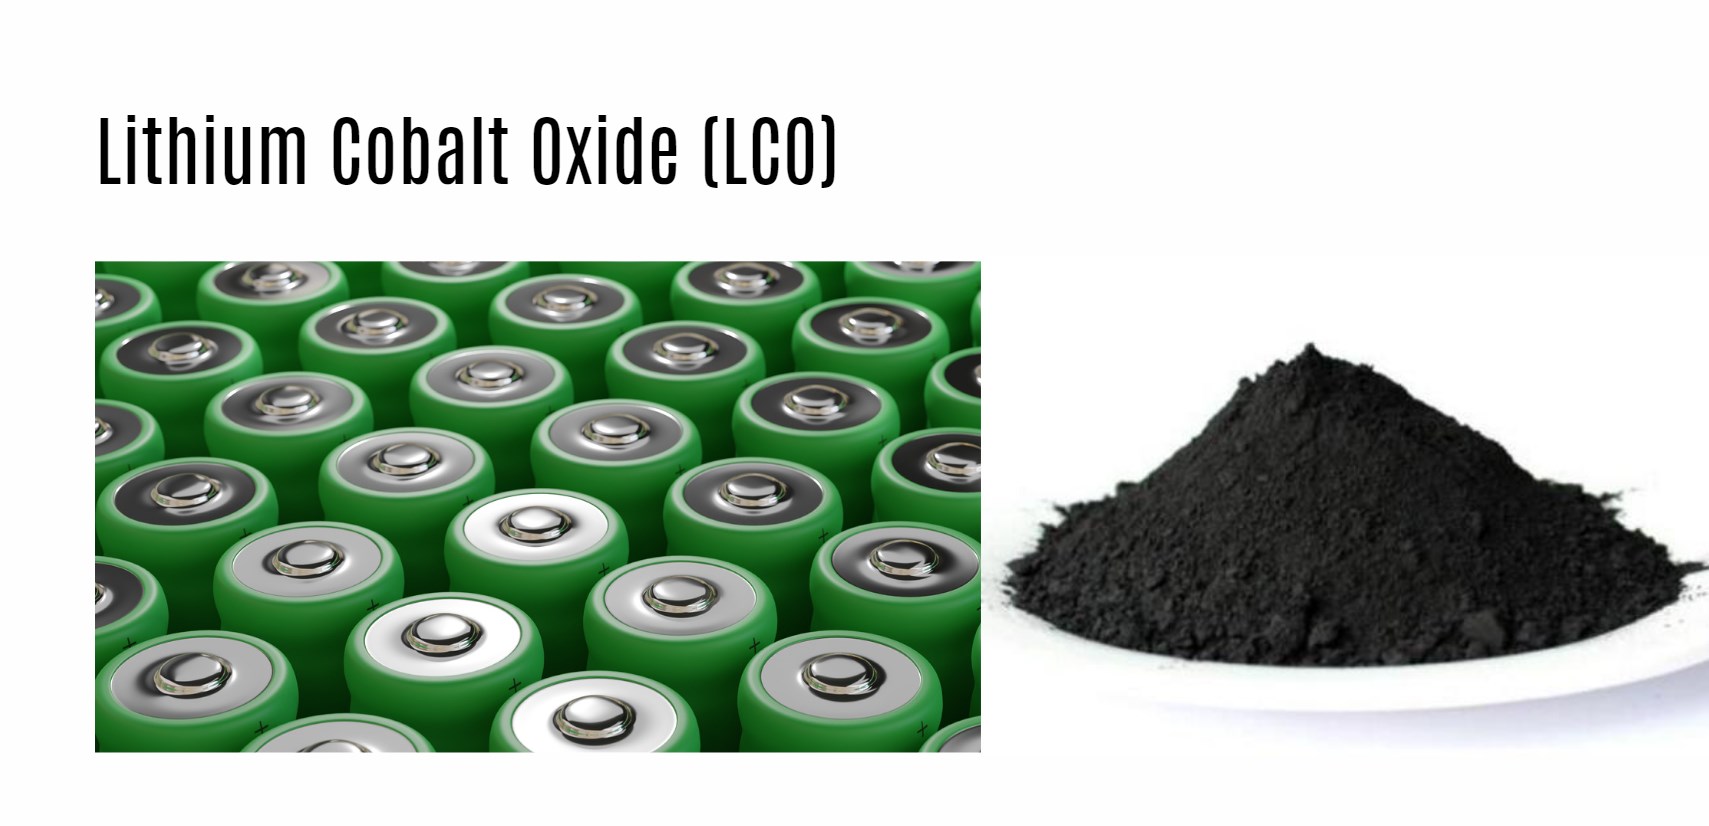 Lithium Cobalt Oxide (LCO). what is LCO?